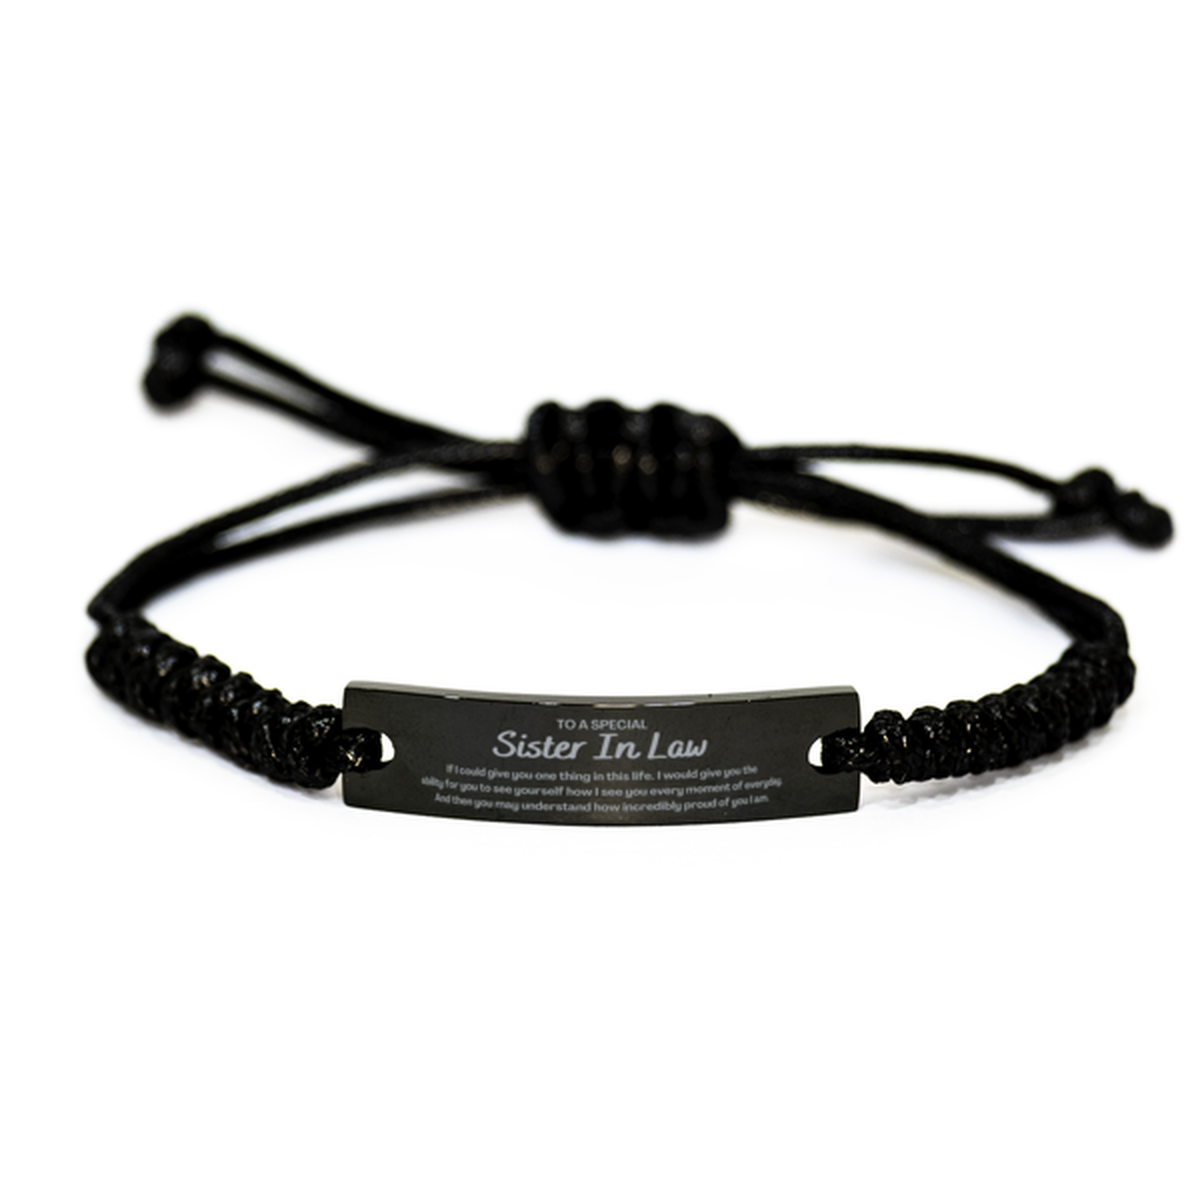 To My Sister In Law Black Rope Bracelet, Gifts For Sister In Law Engraved, Inspirational Gifts for Christmas Birthday, Epic Gifts for Sister In Law To A Special Sister In Law how incredibly proud of you I am